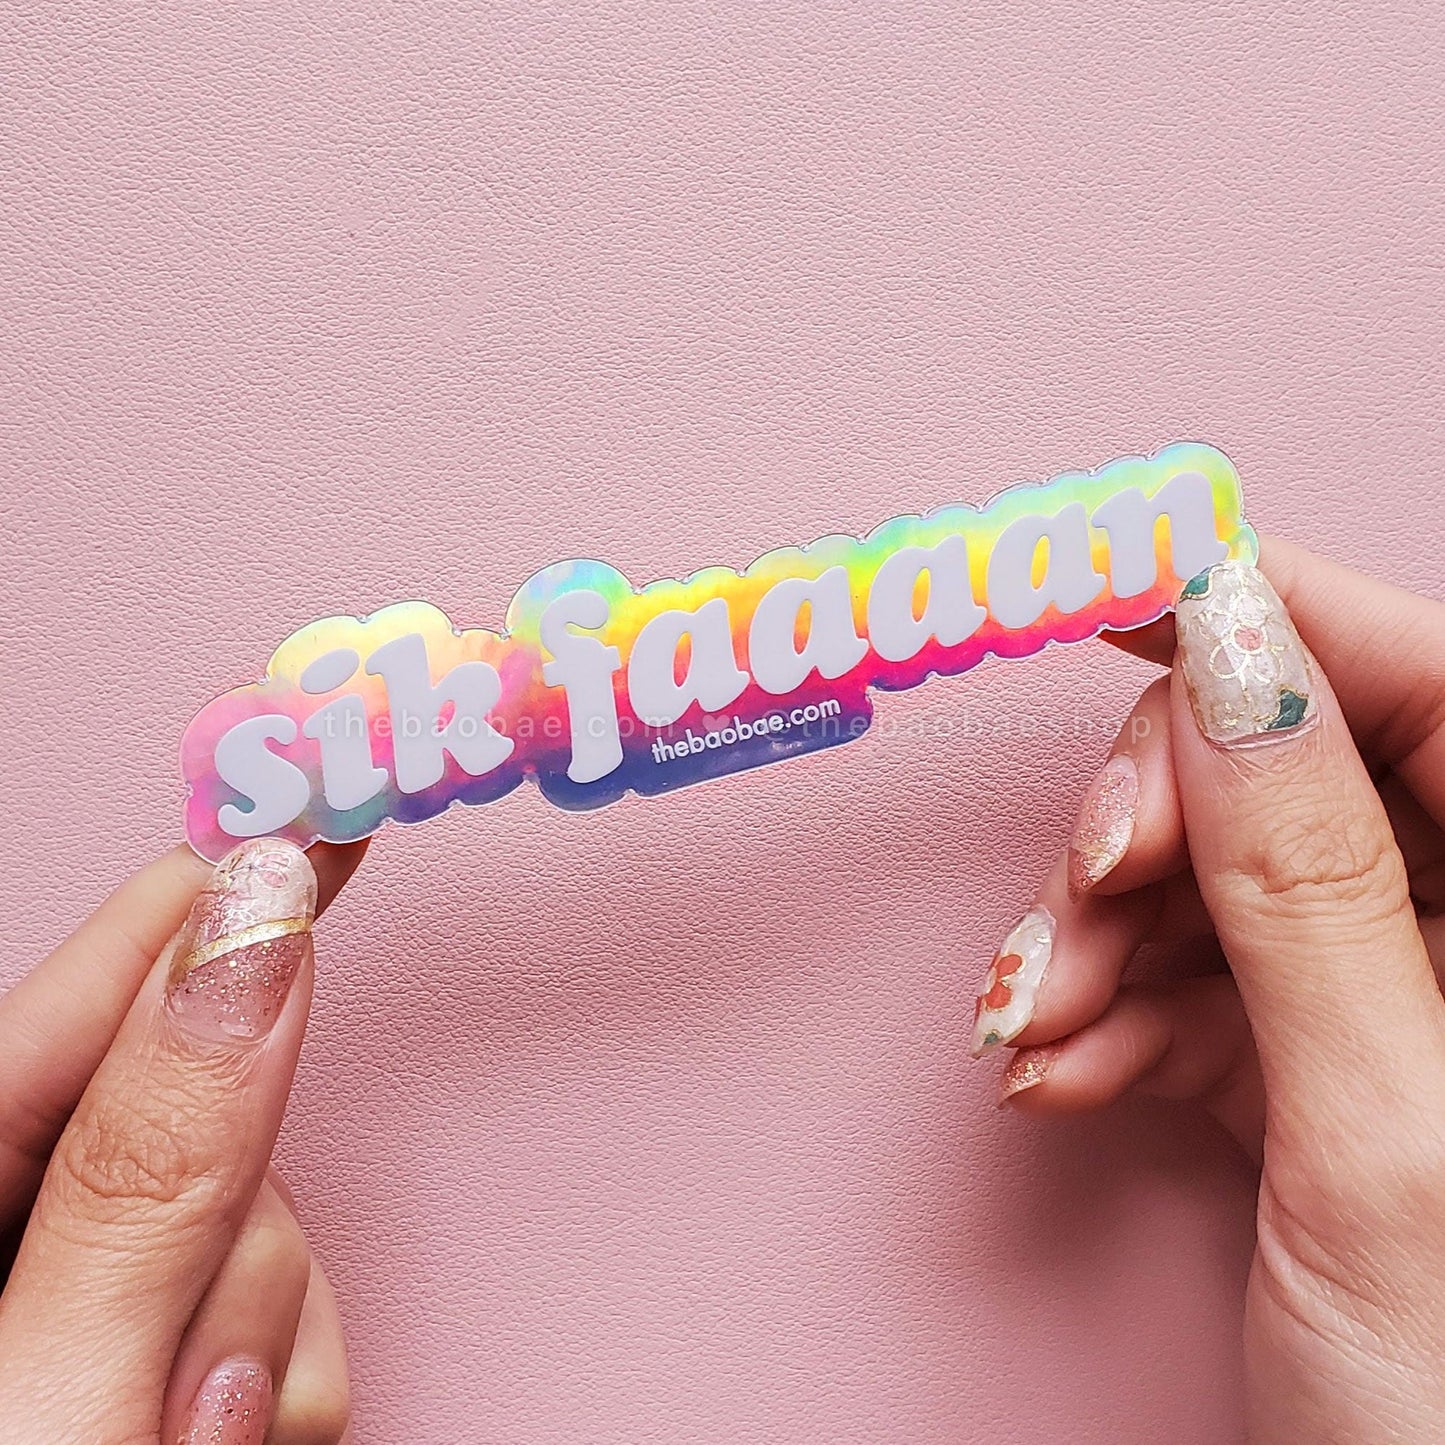 Sik Faan Eat Rice Holographic Sticker